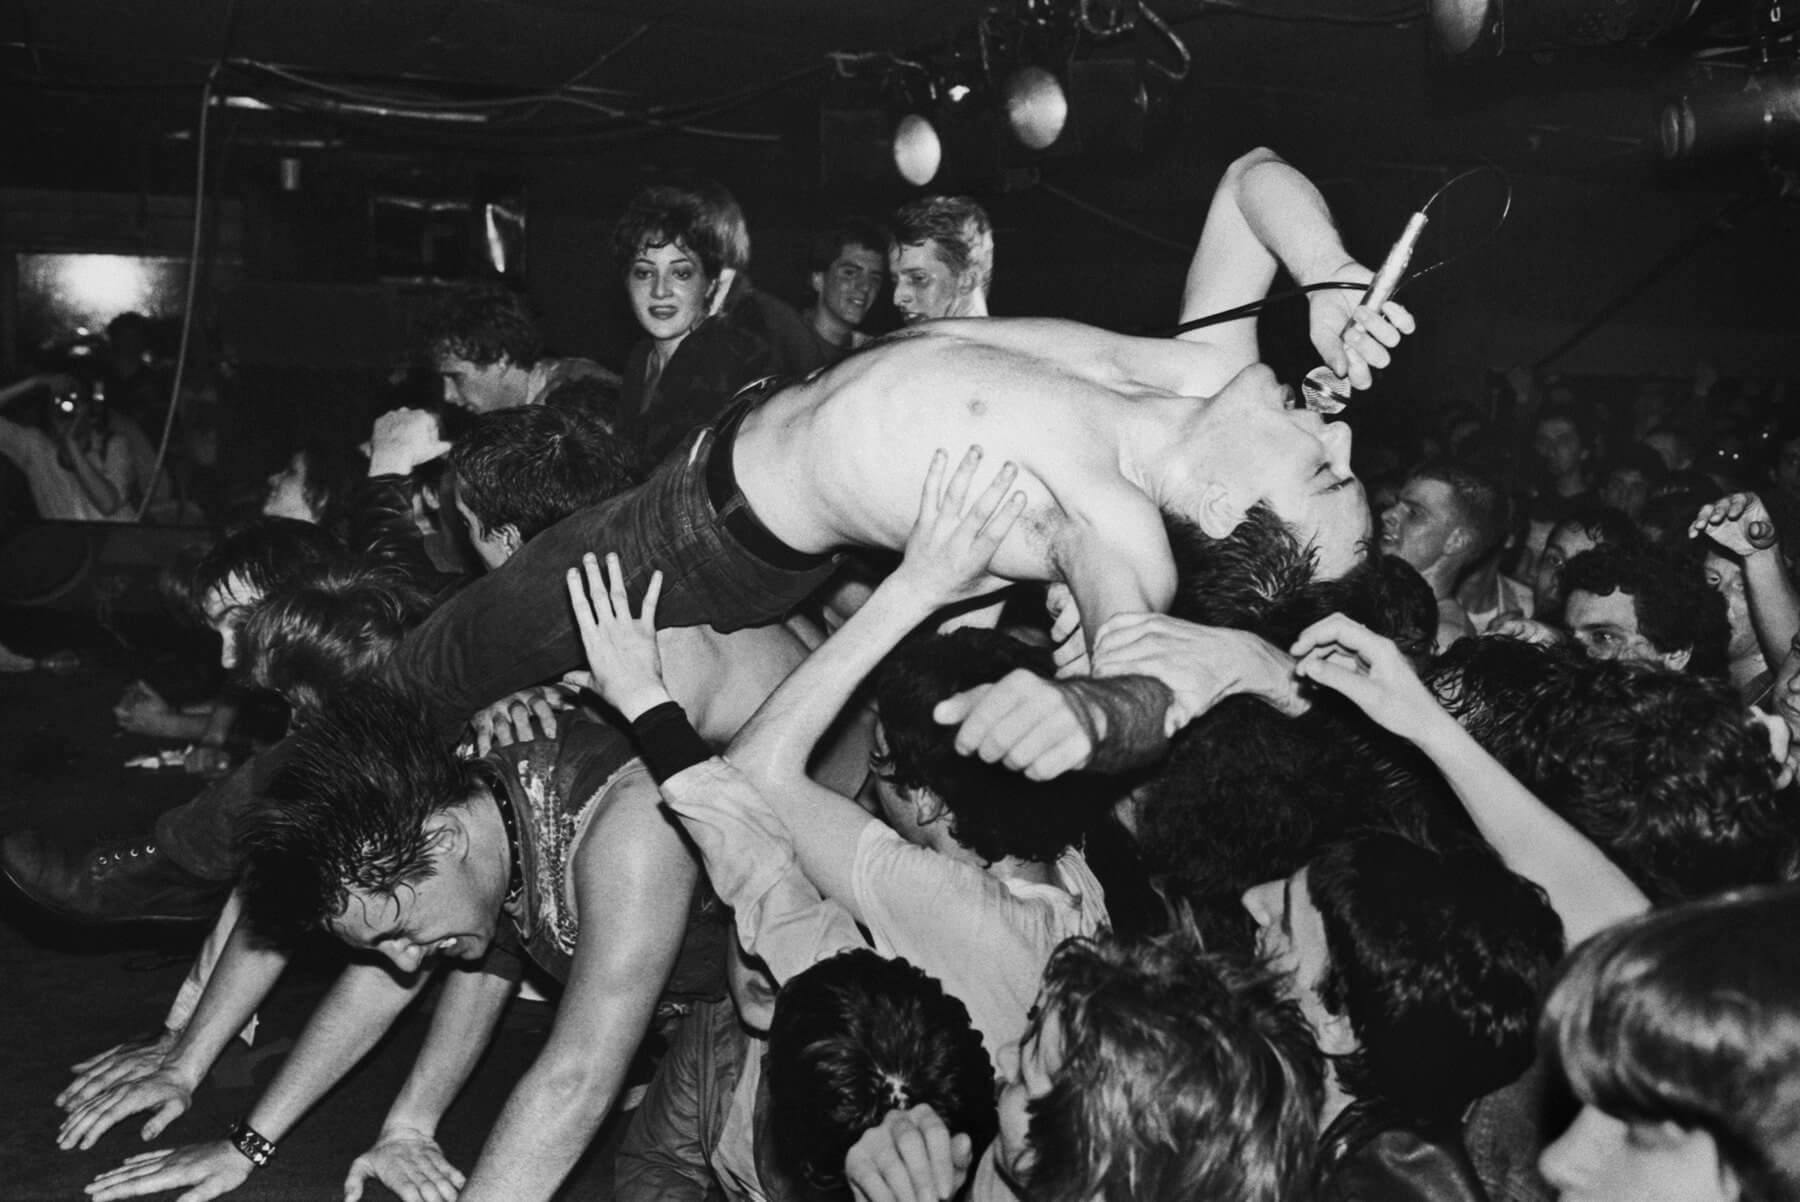 Jello Biafra, lead singer of the punk rock group Dead Kennedys performs on stage on April 1981 in Boston, Massachusetts.